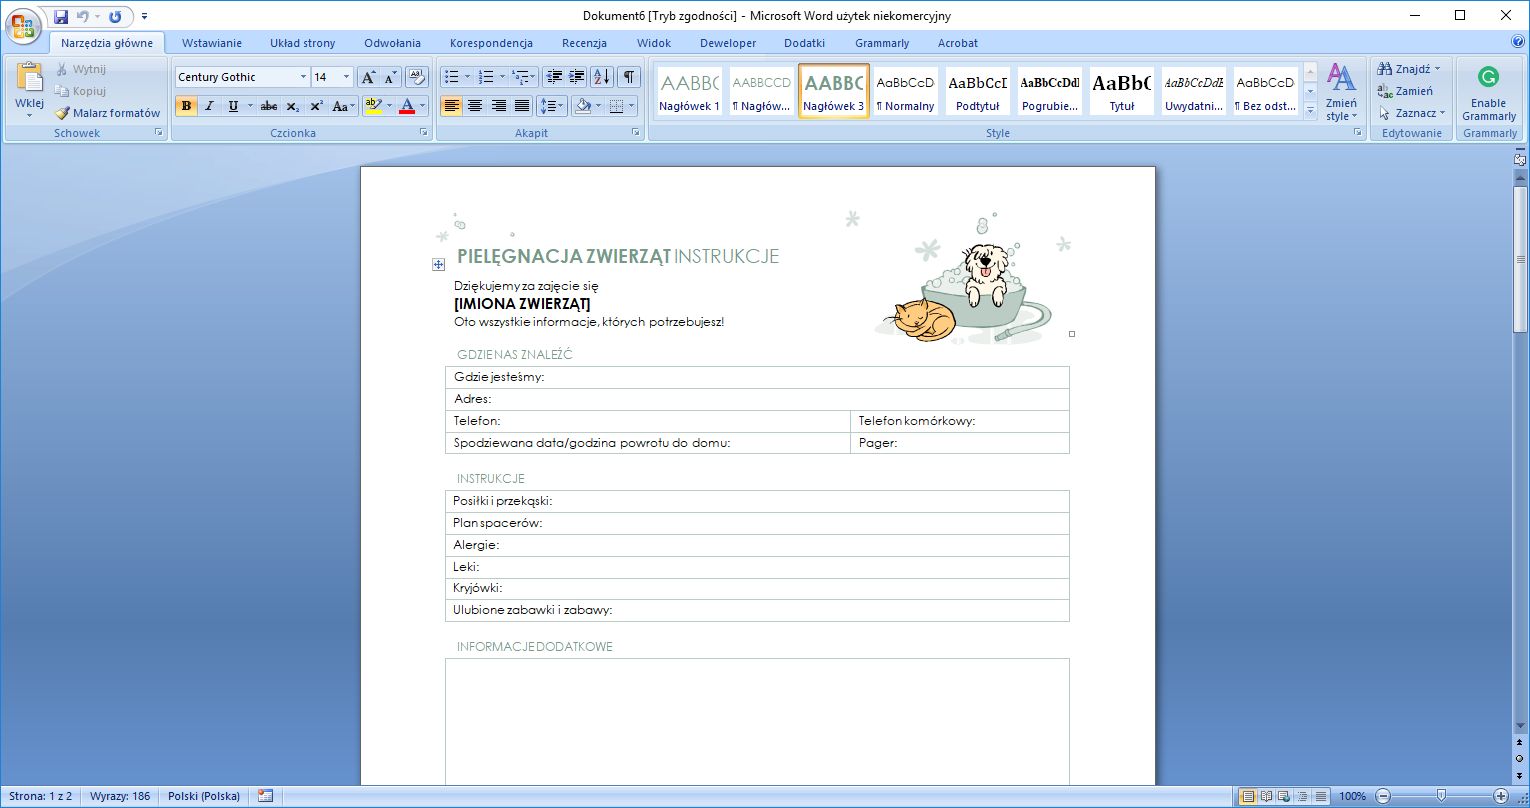 microsoft excel 2007 download for windows 10